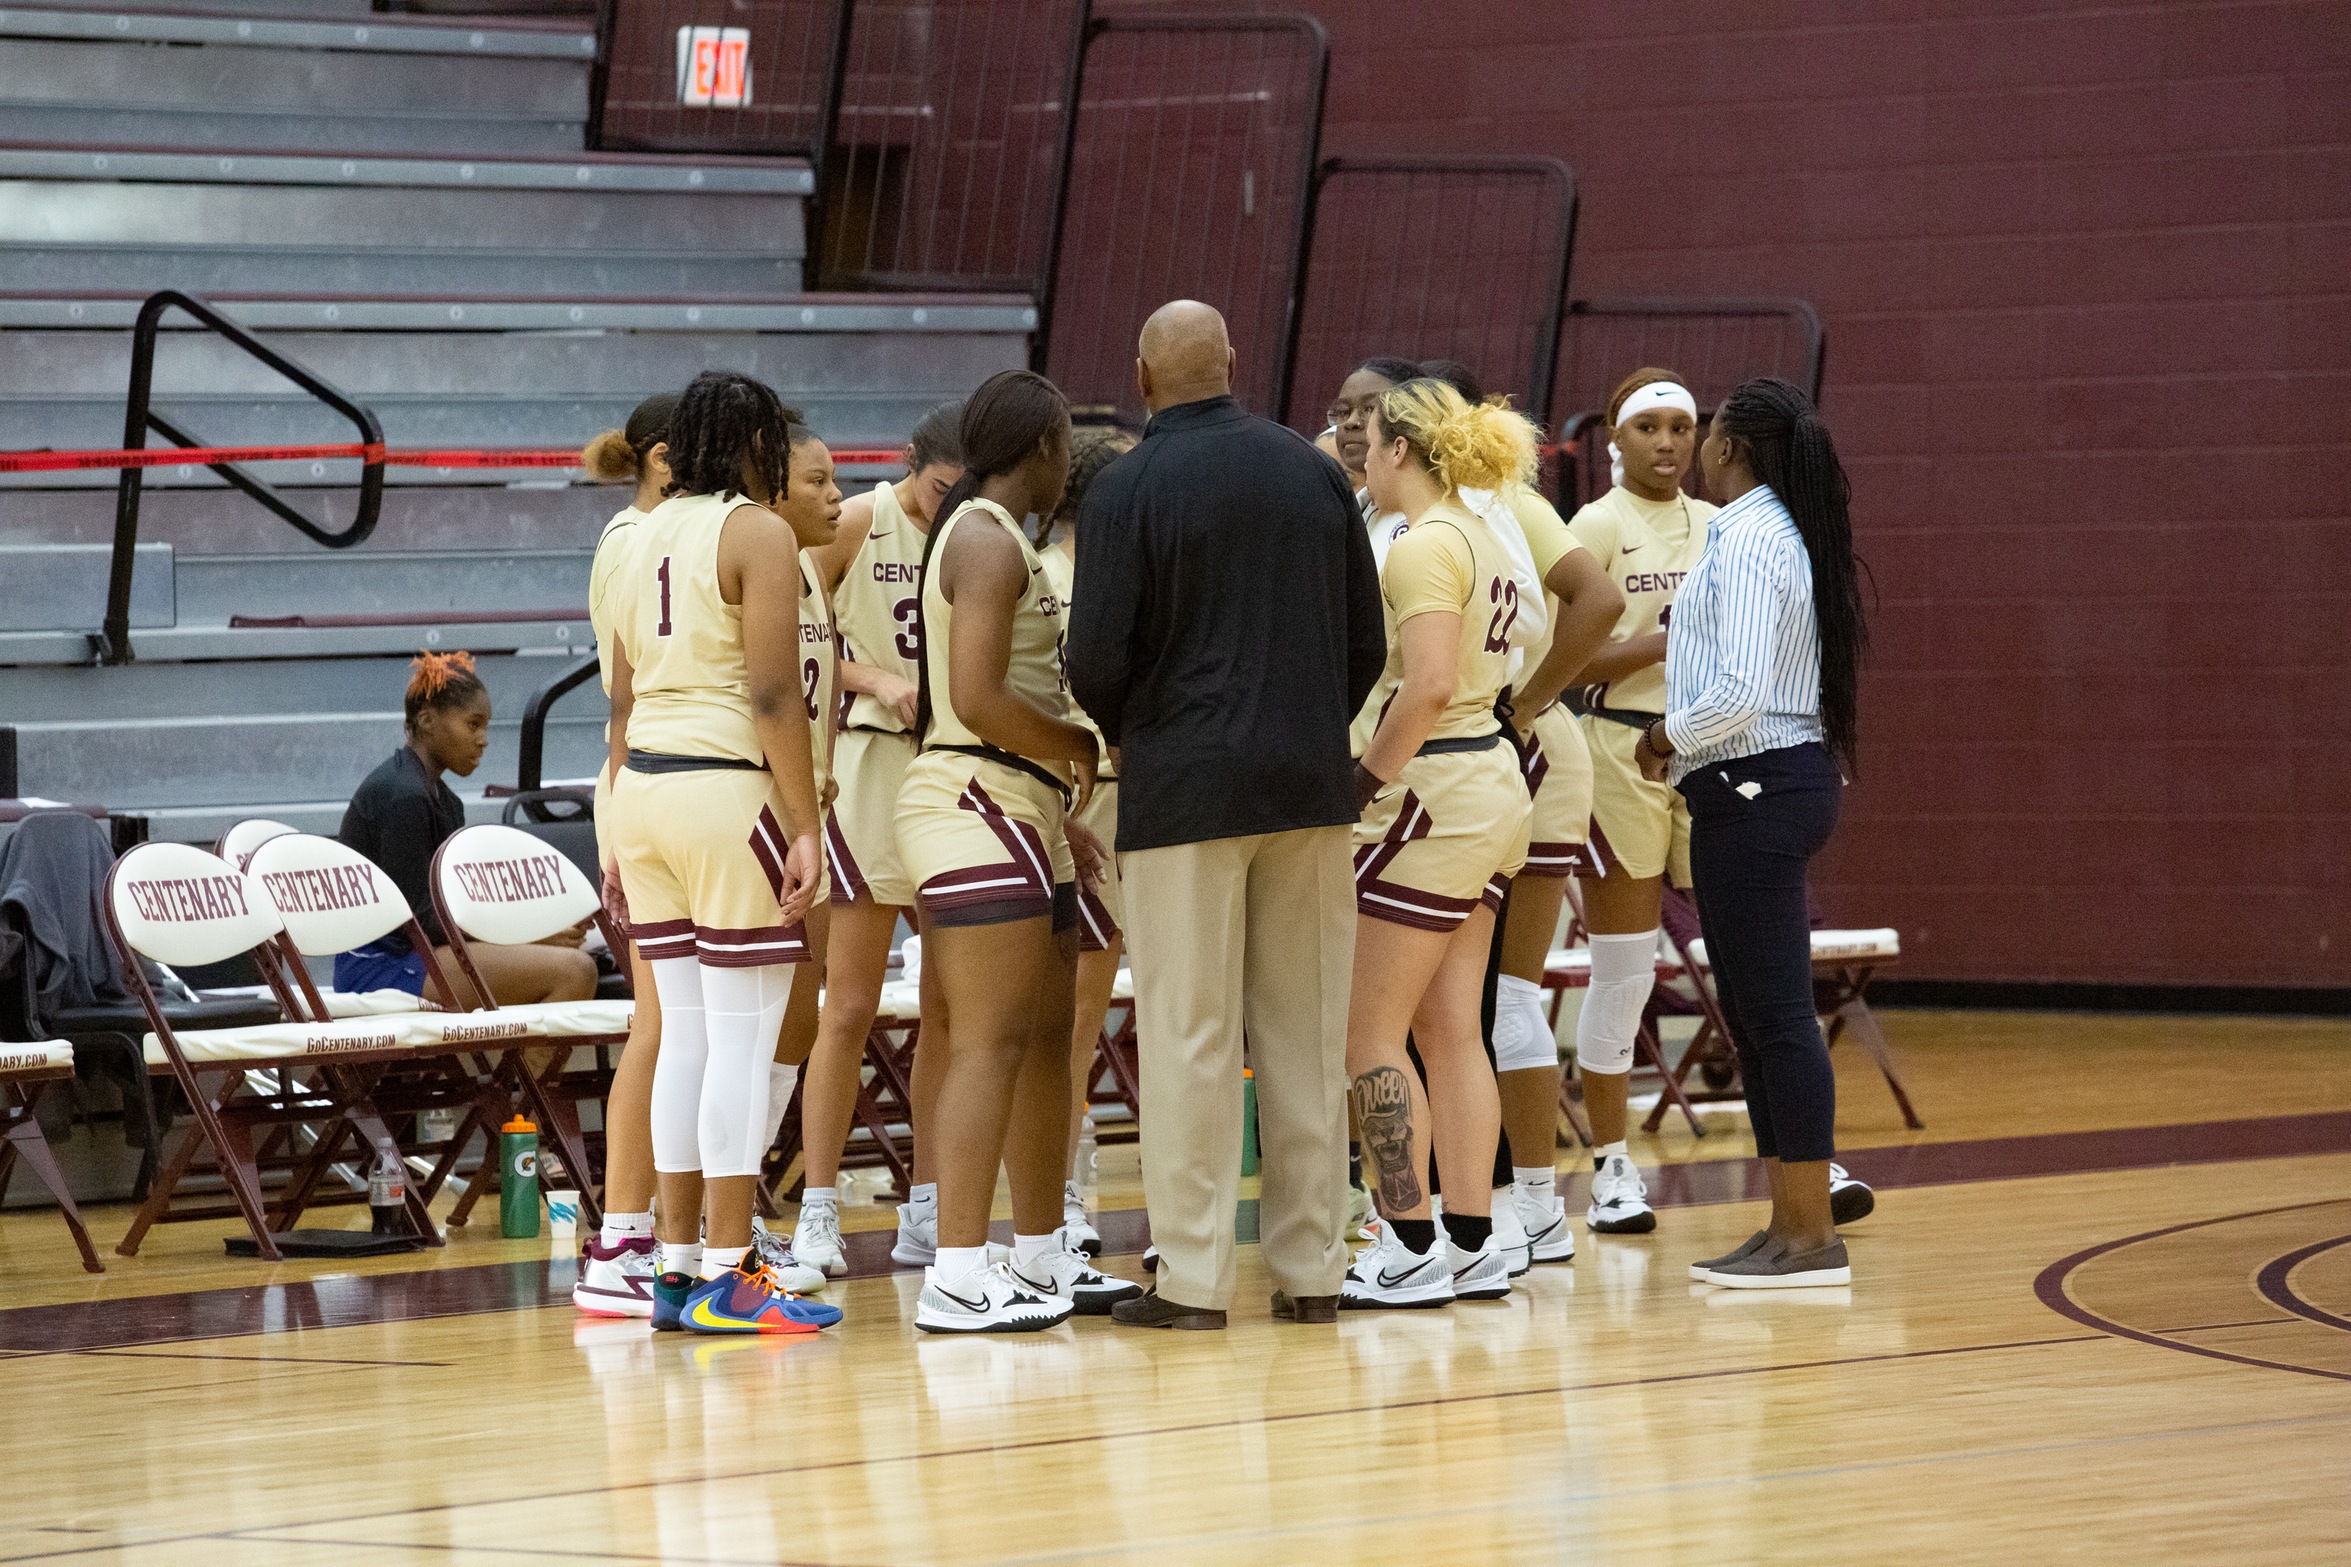 Ladies Open SCAC Play With 62-59 Win At Dallas